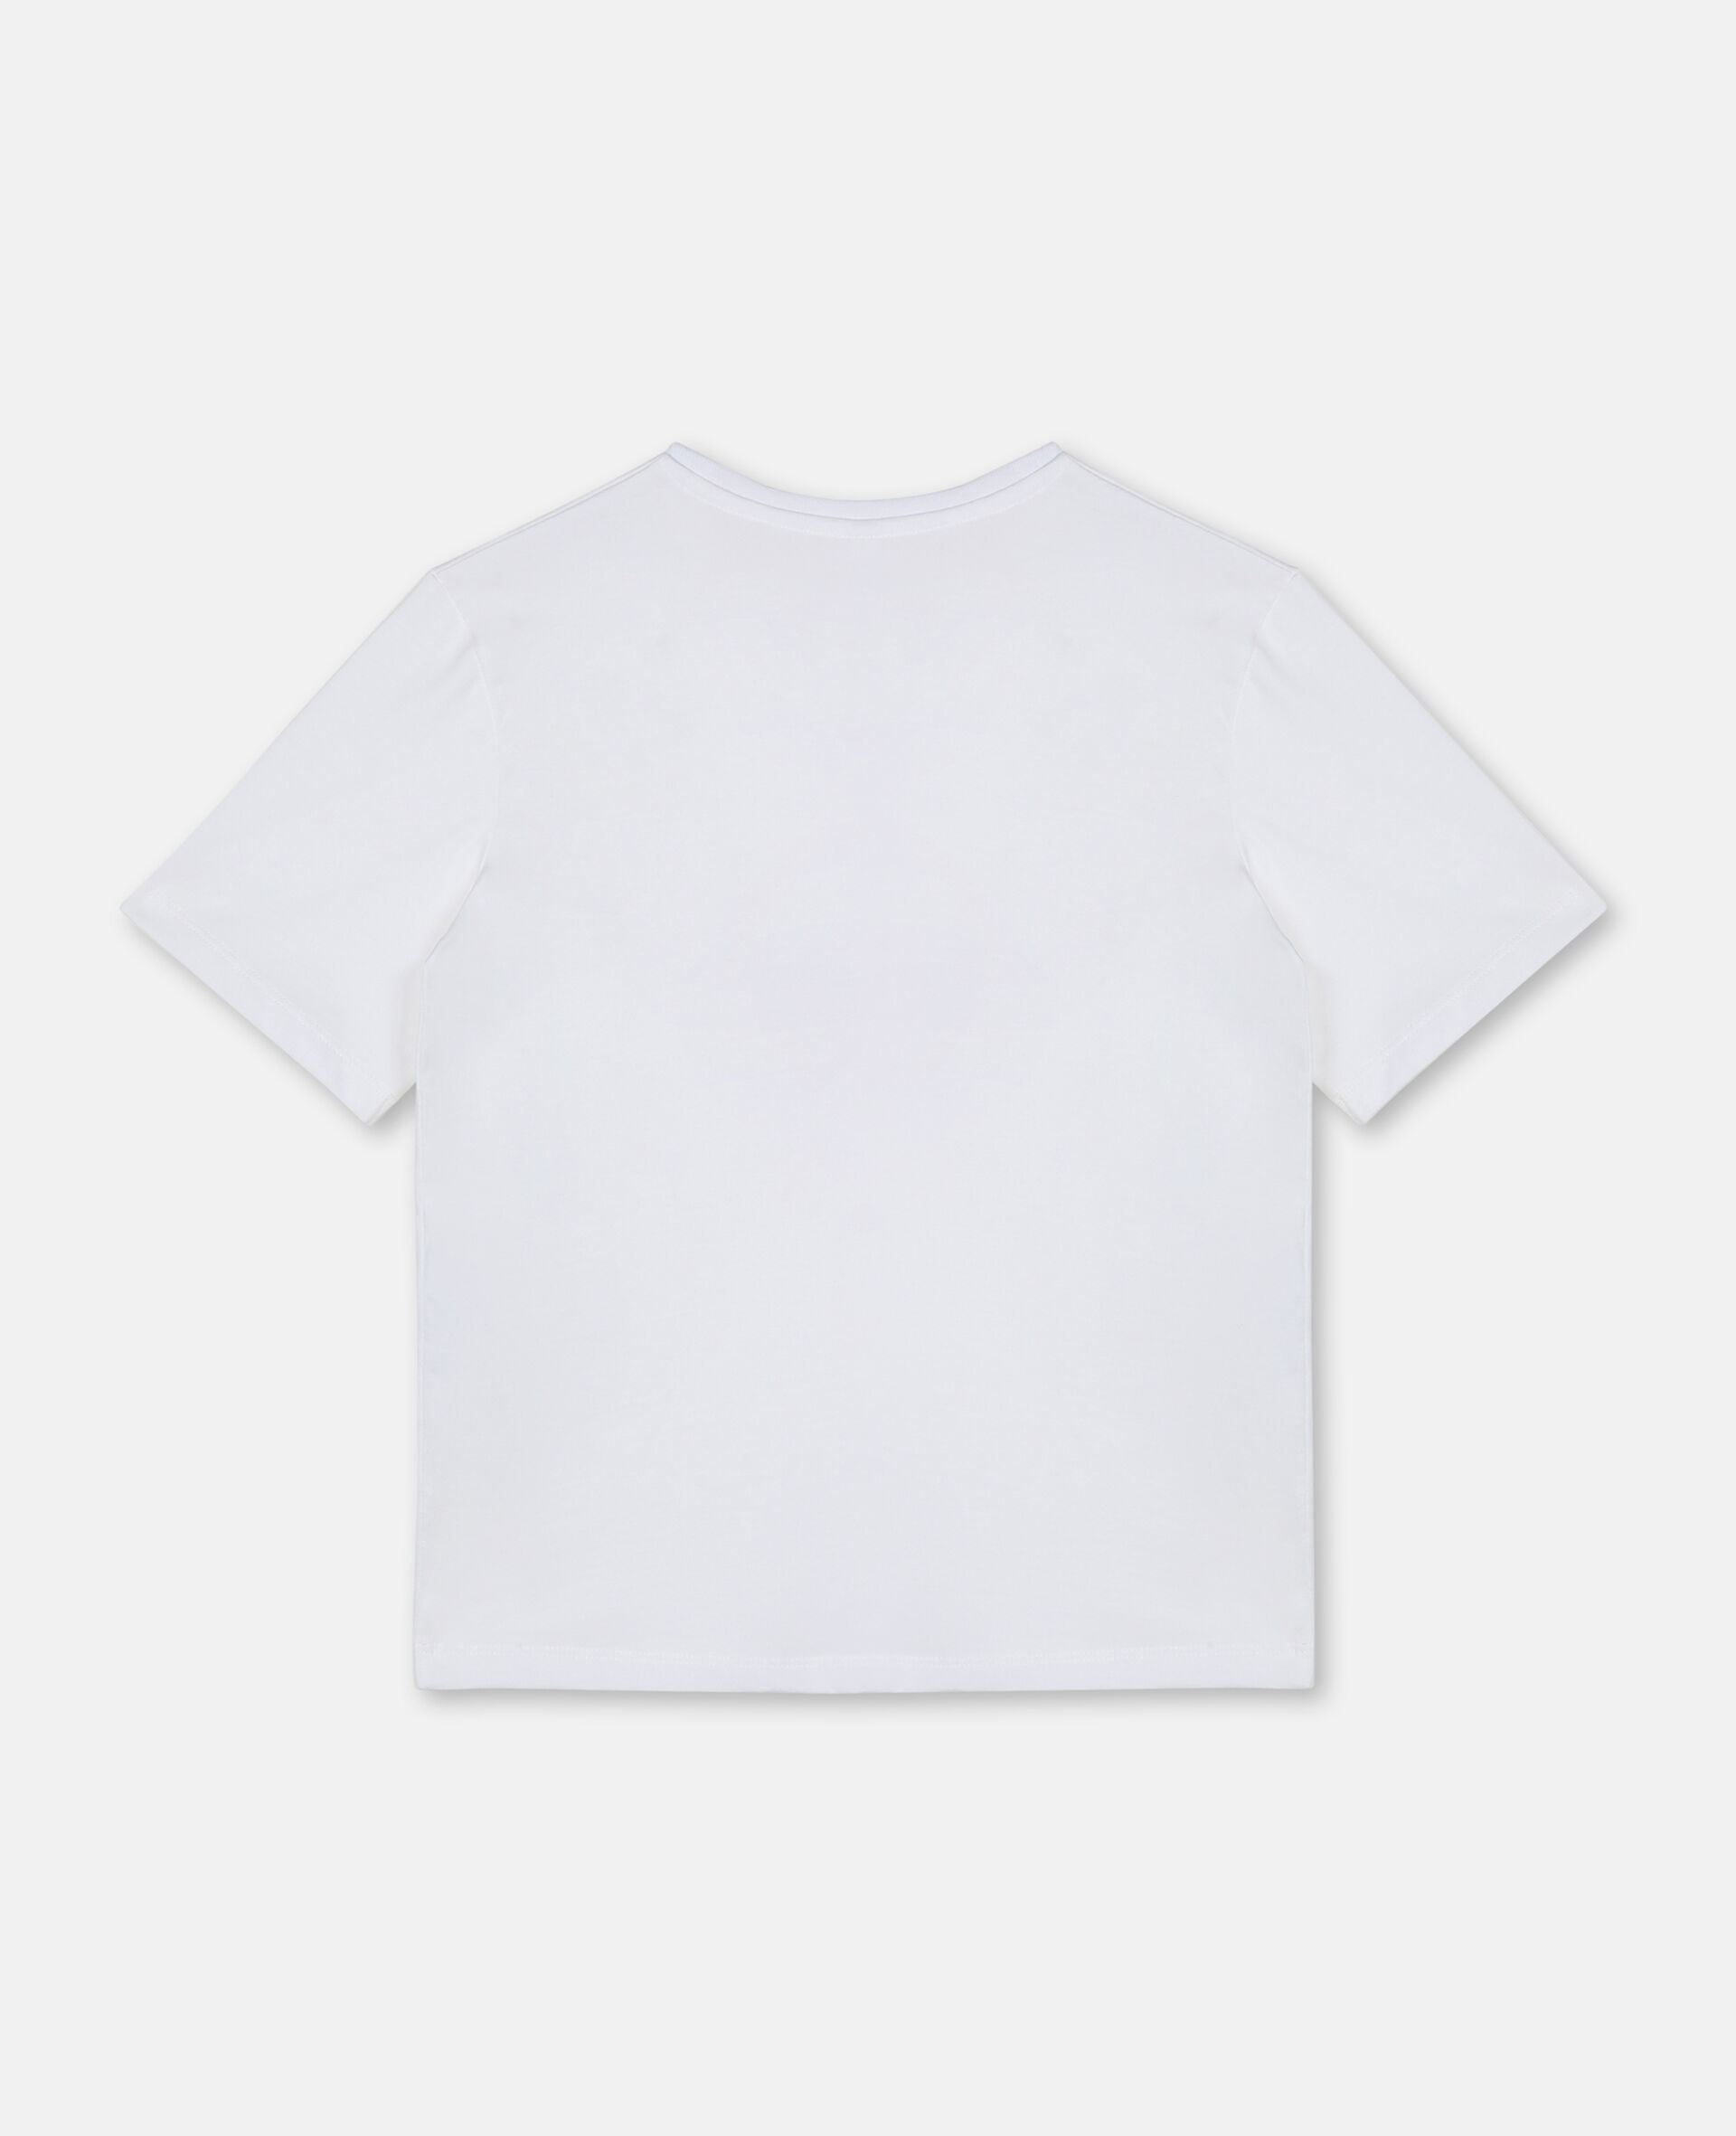 Extra Cool Oversize Cotton T-shirt -White-large image number 3